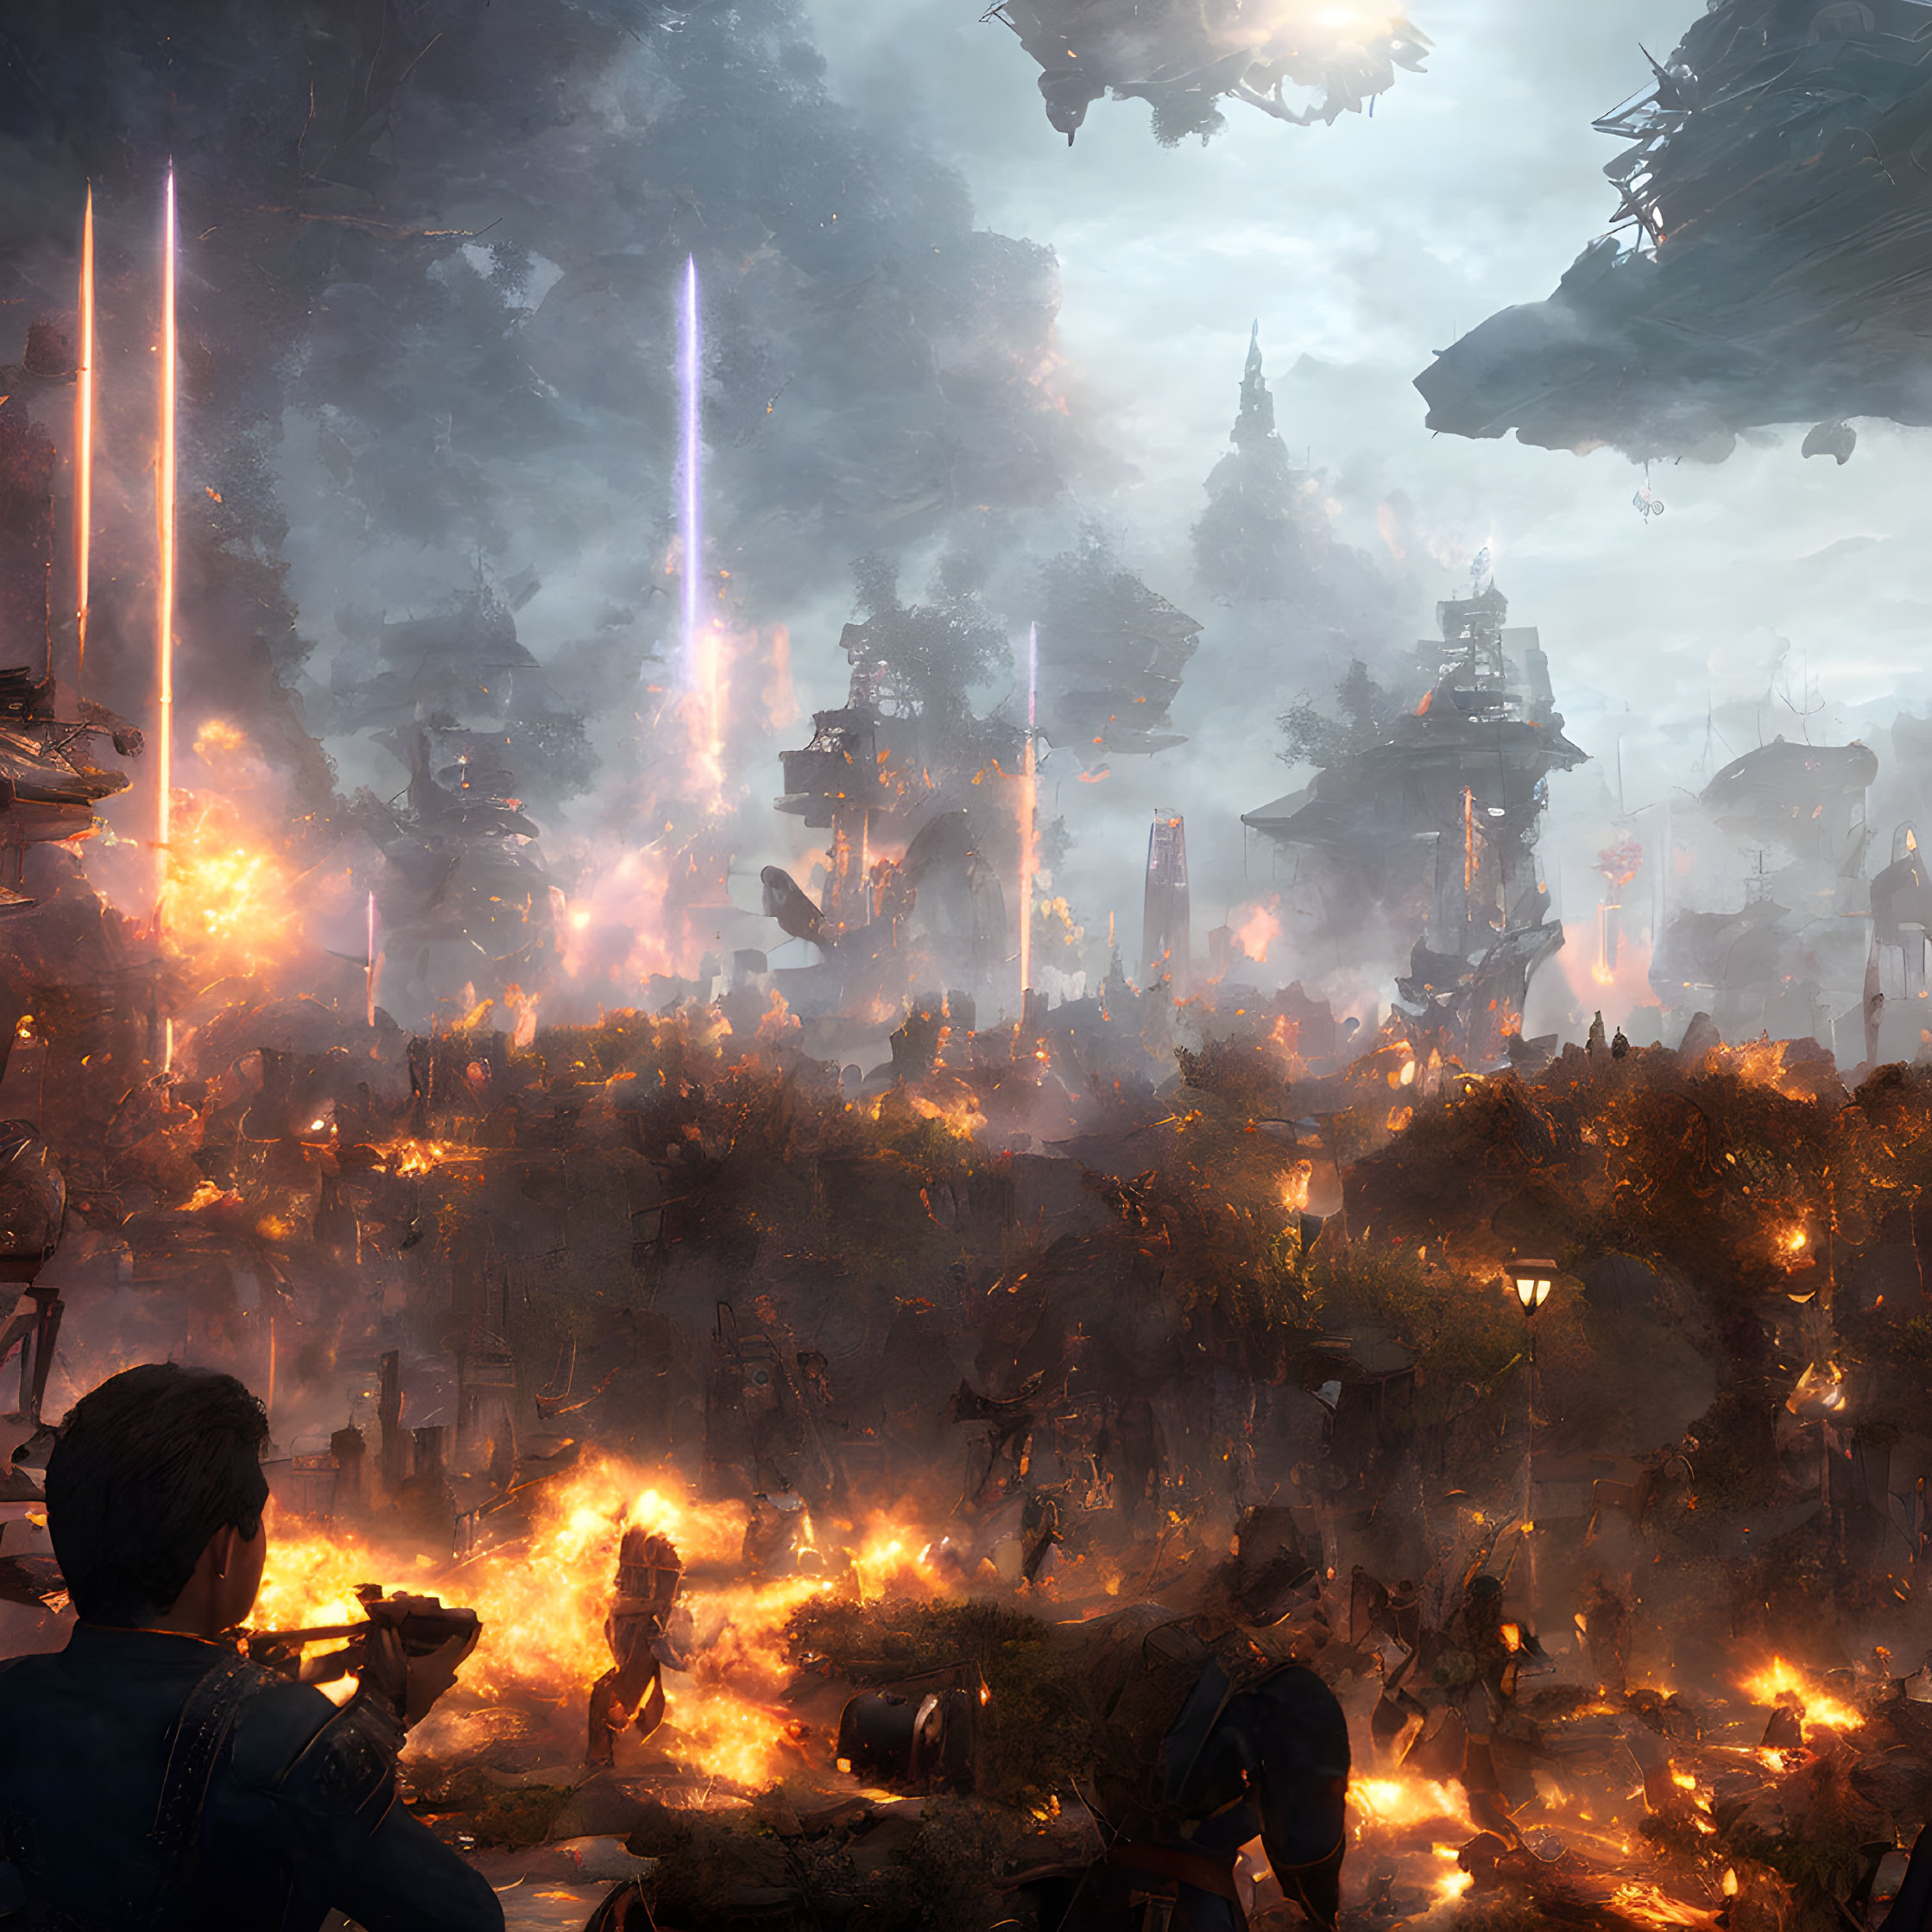 Futuristic battle scene with soldier, burning structures, blue beams, and floating islands